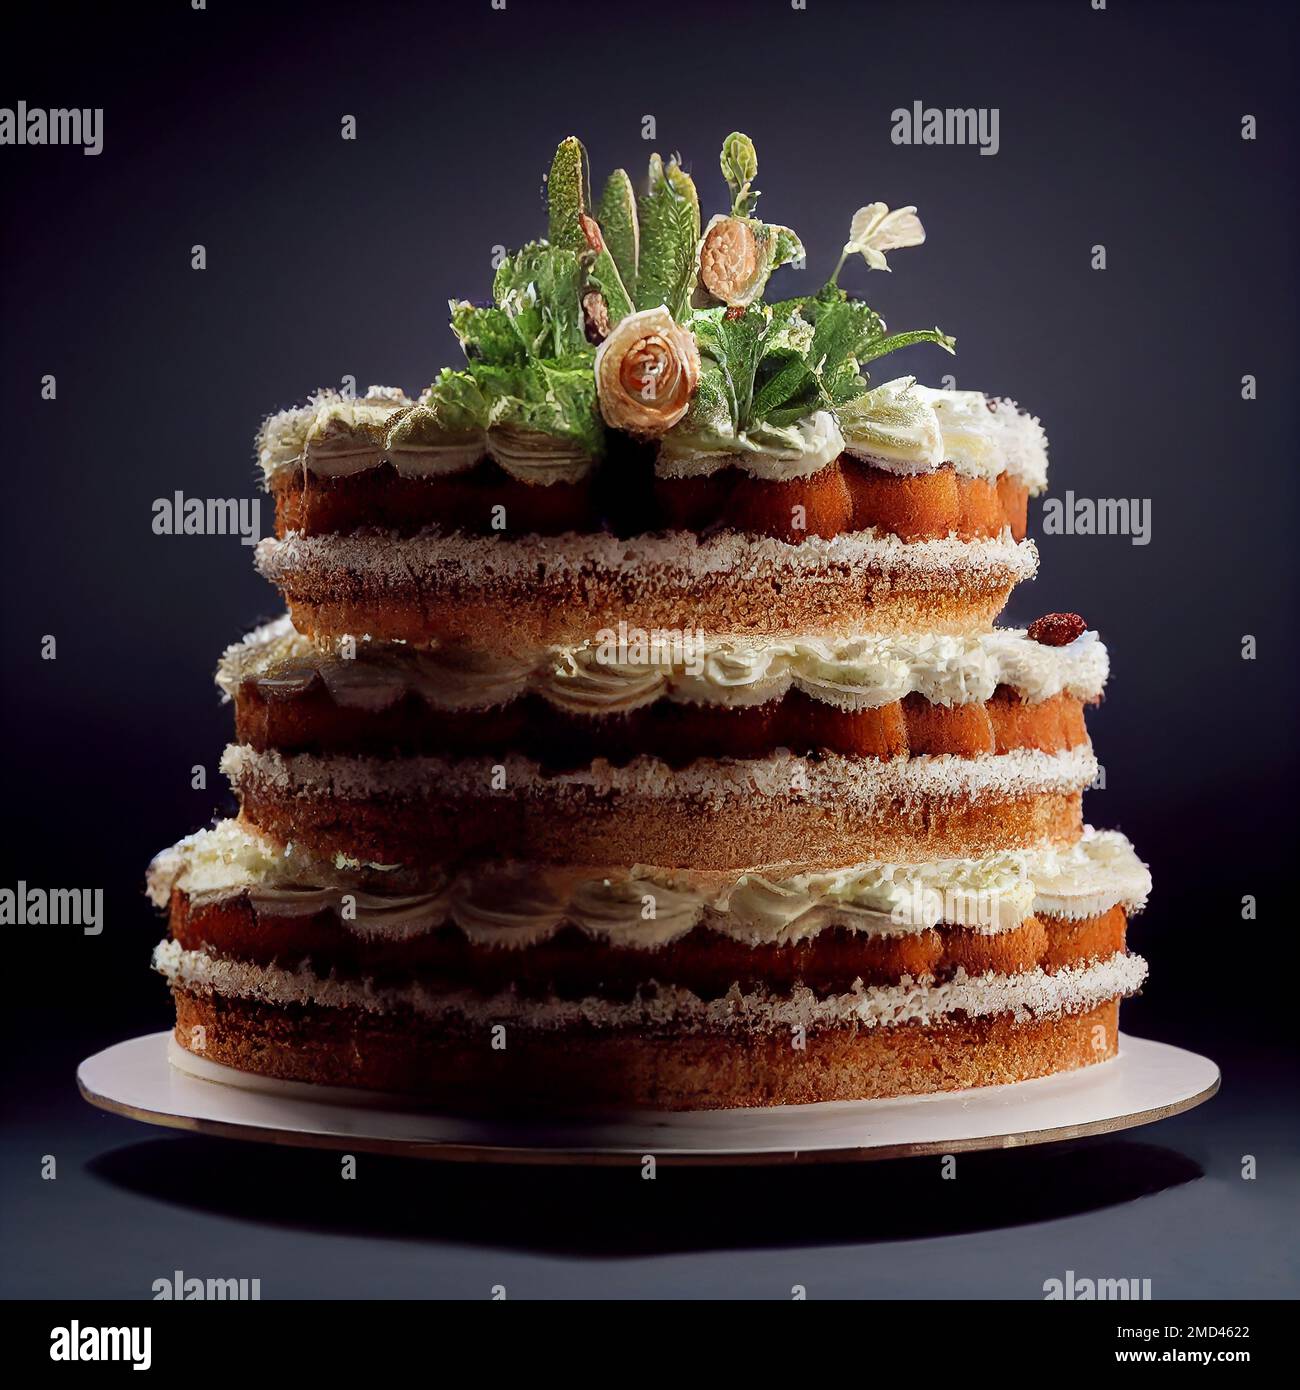 Beautiful tiered cake decorated with flowers Stock Photo